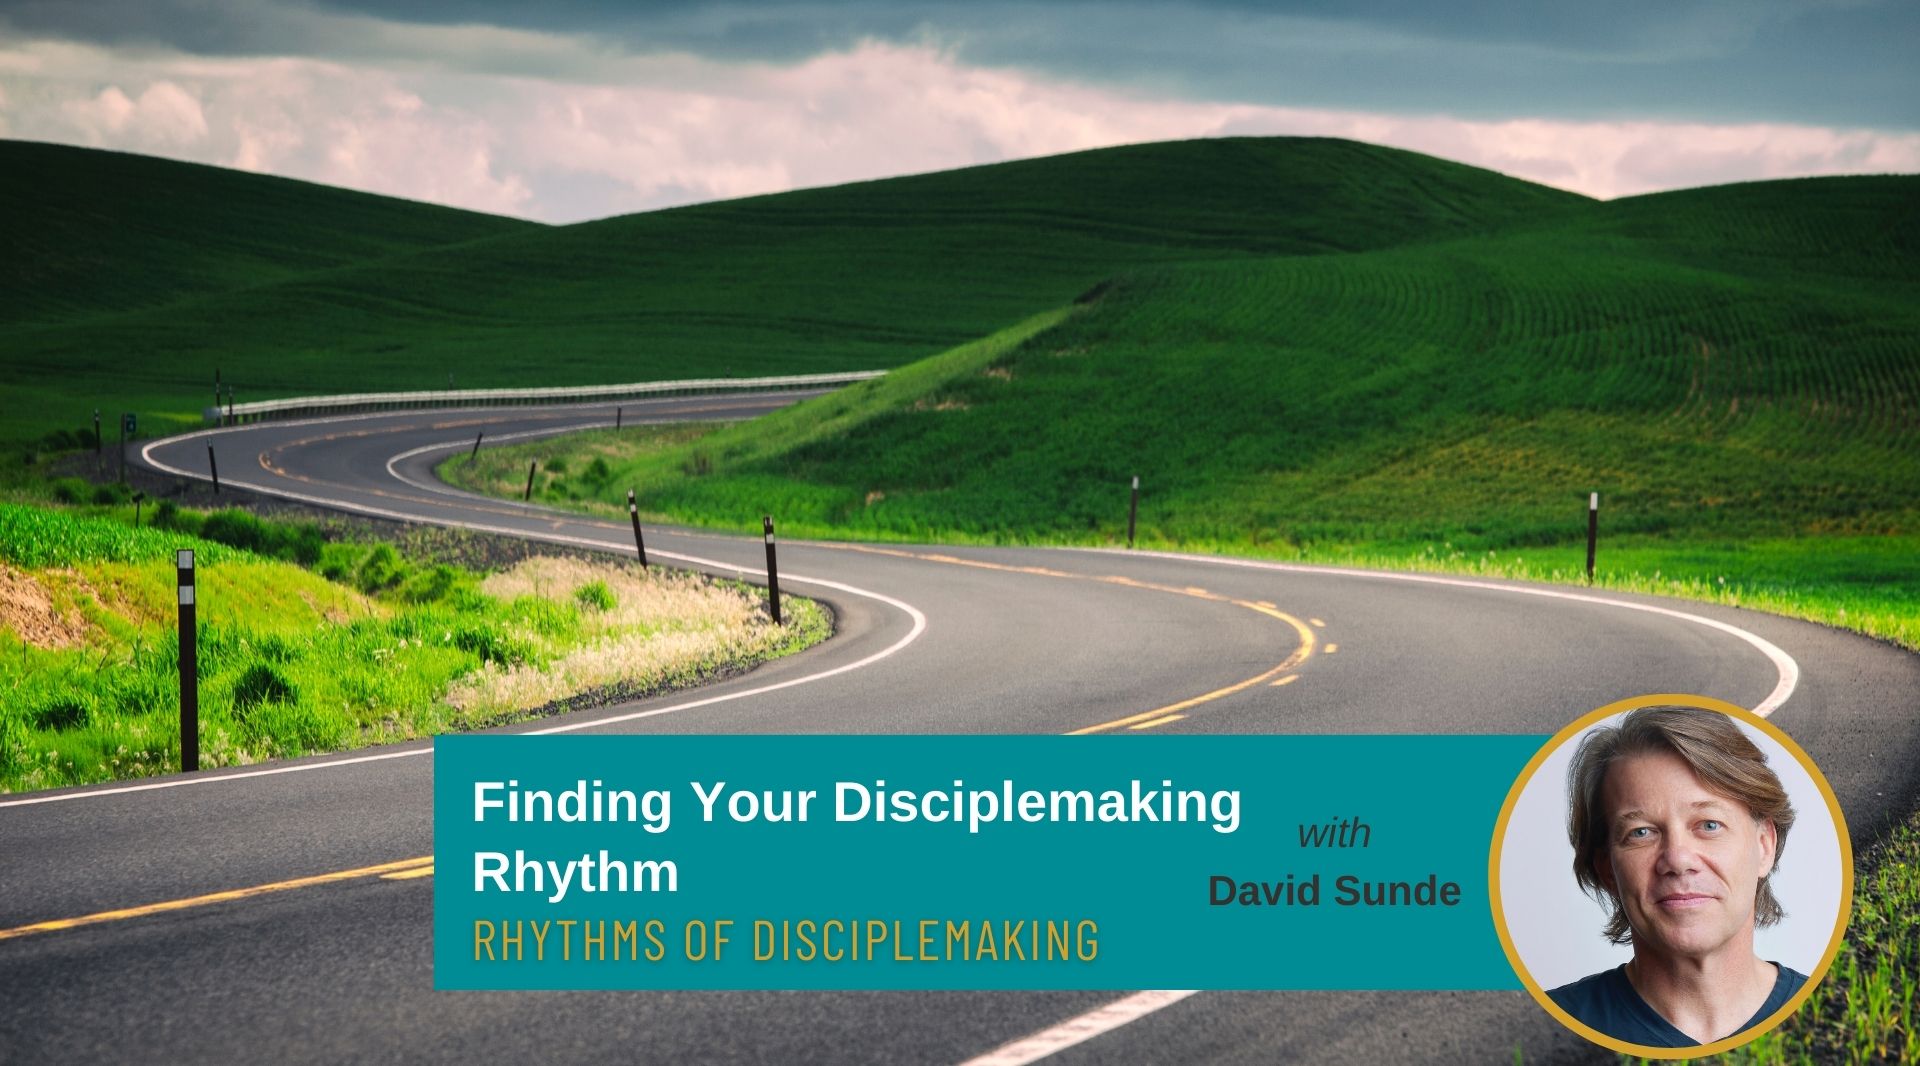 Finding Your Disciplemaking Rhythm